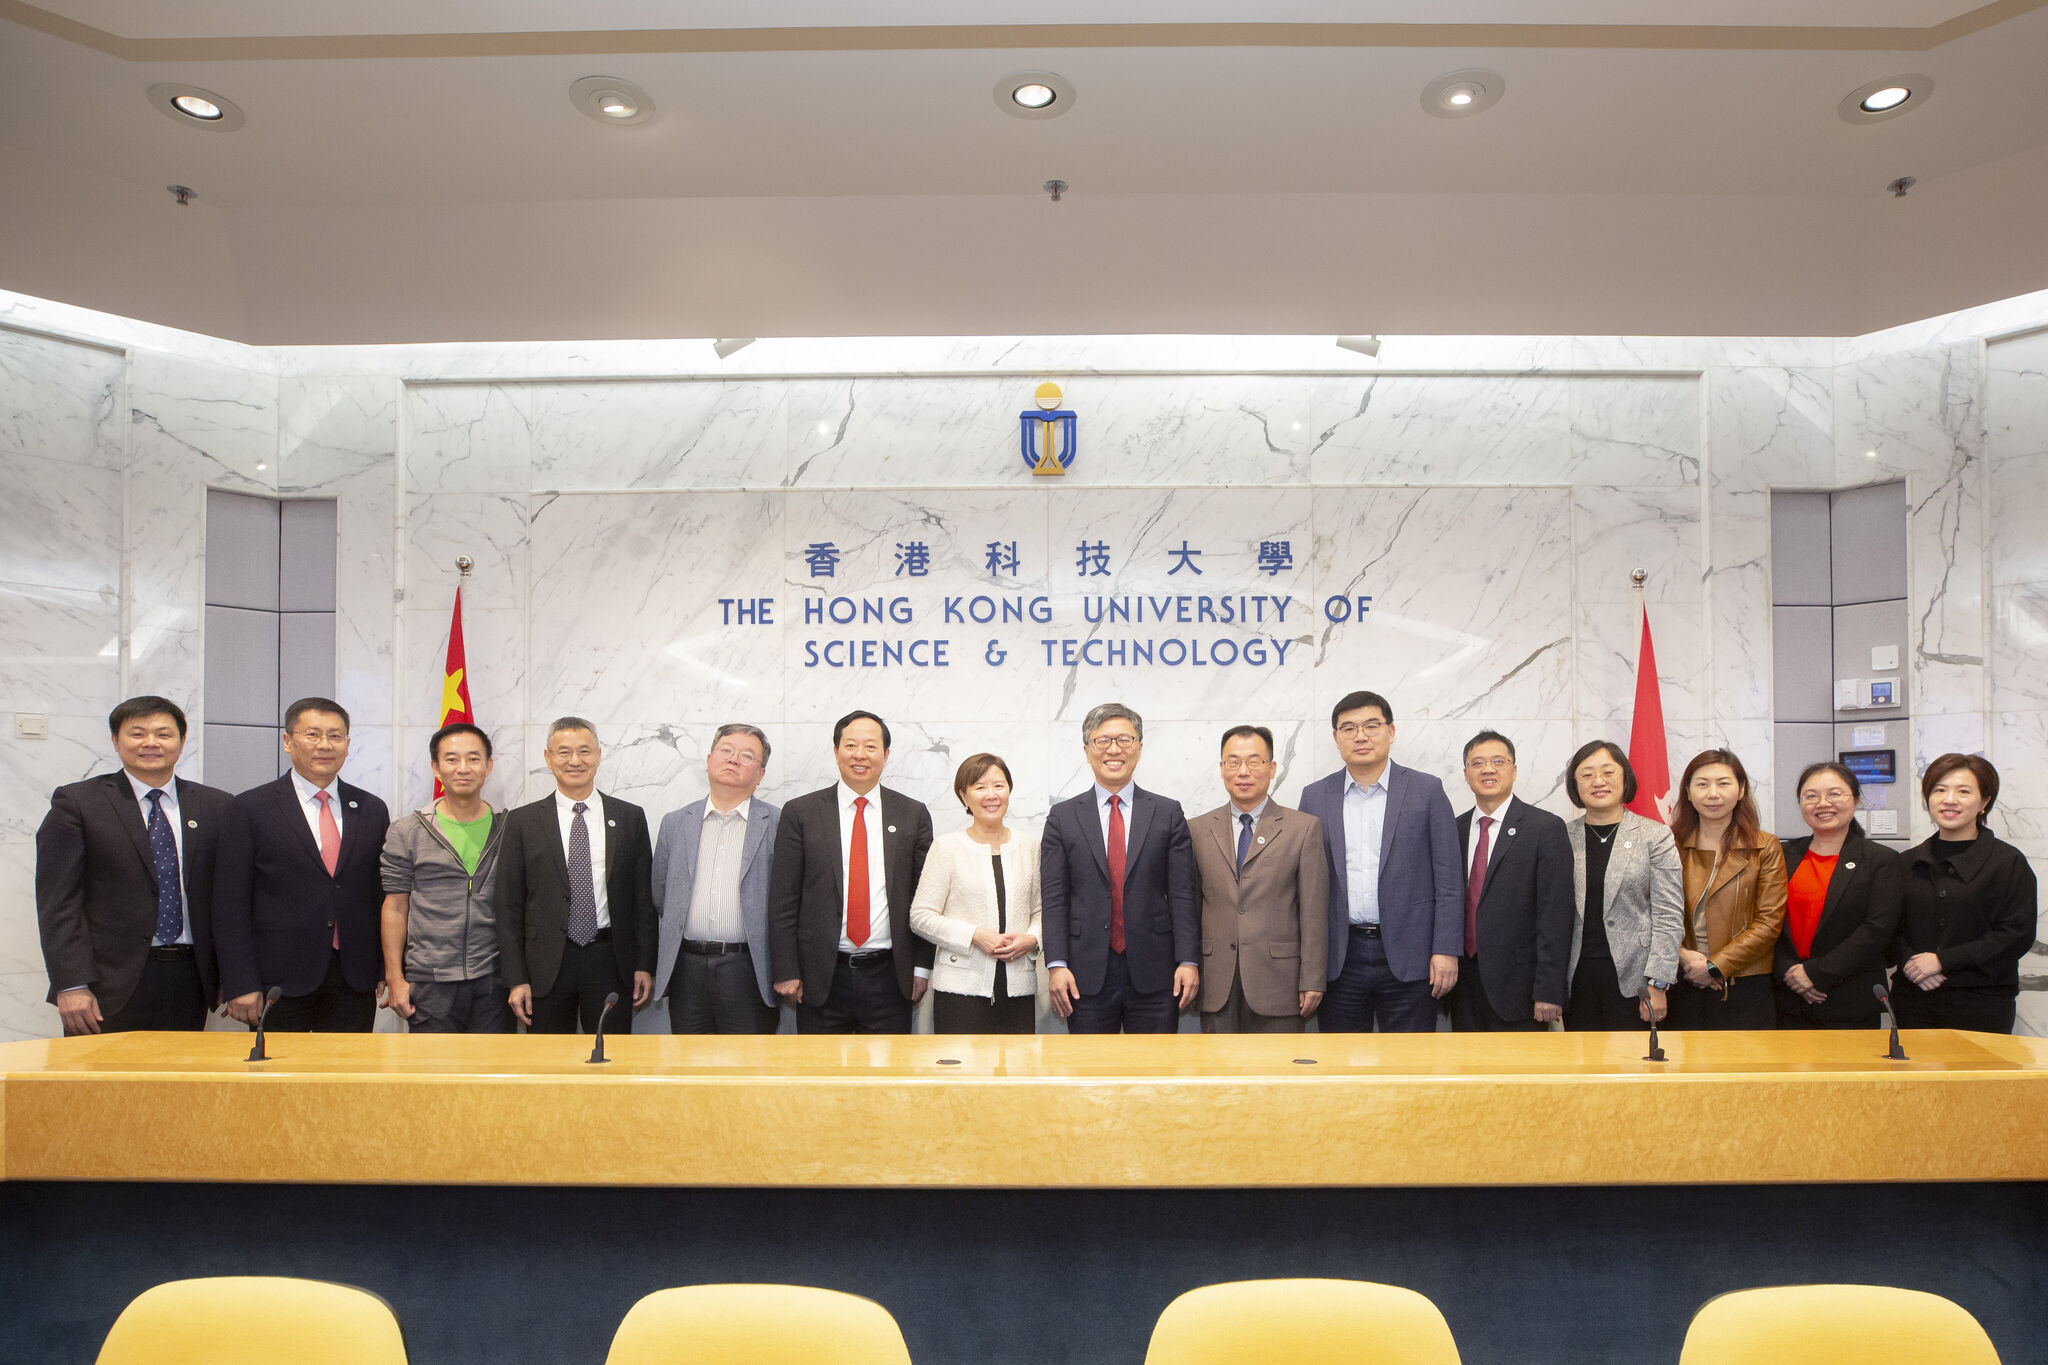 A group photo of the South China University of Technology delegation and the HKUST team.